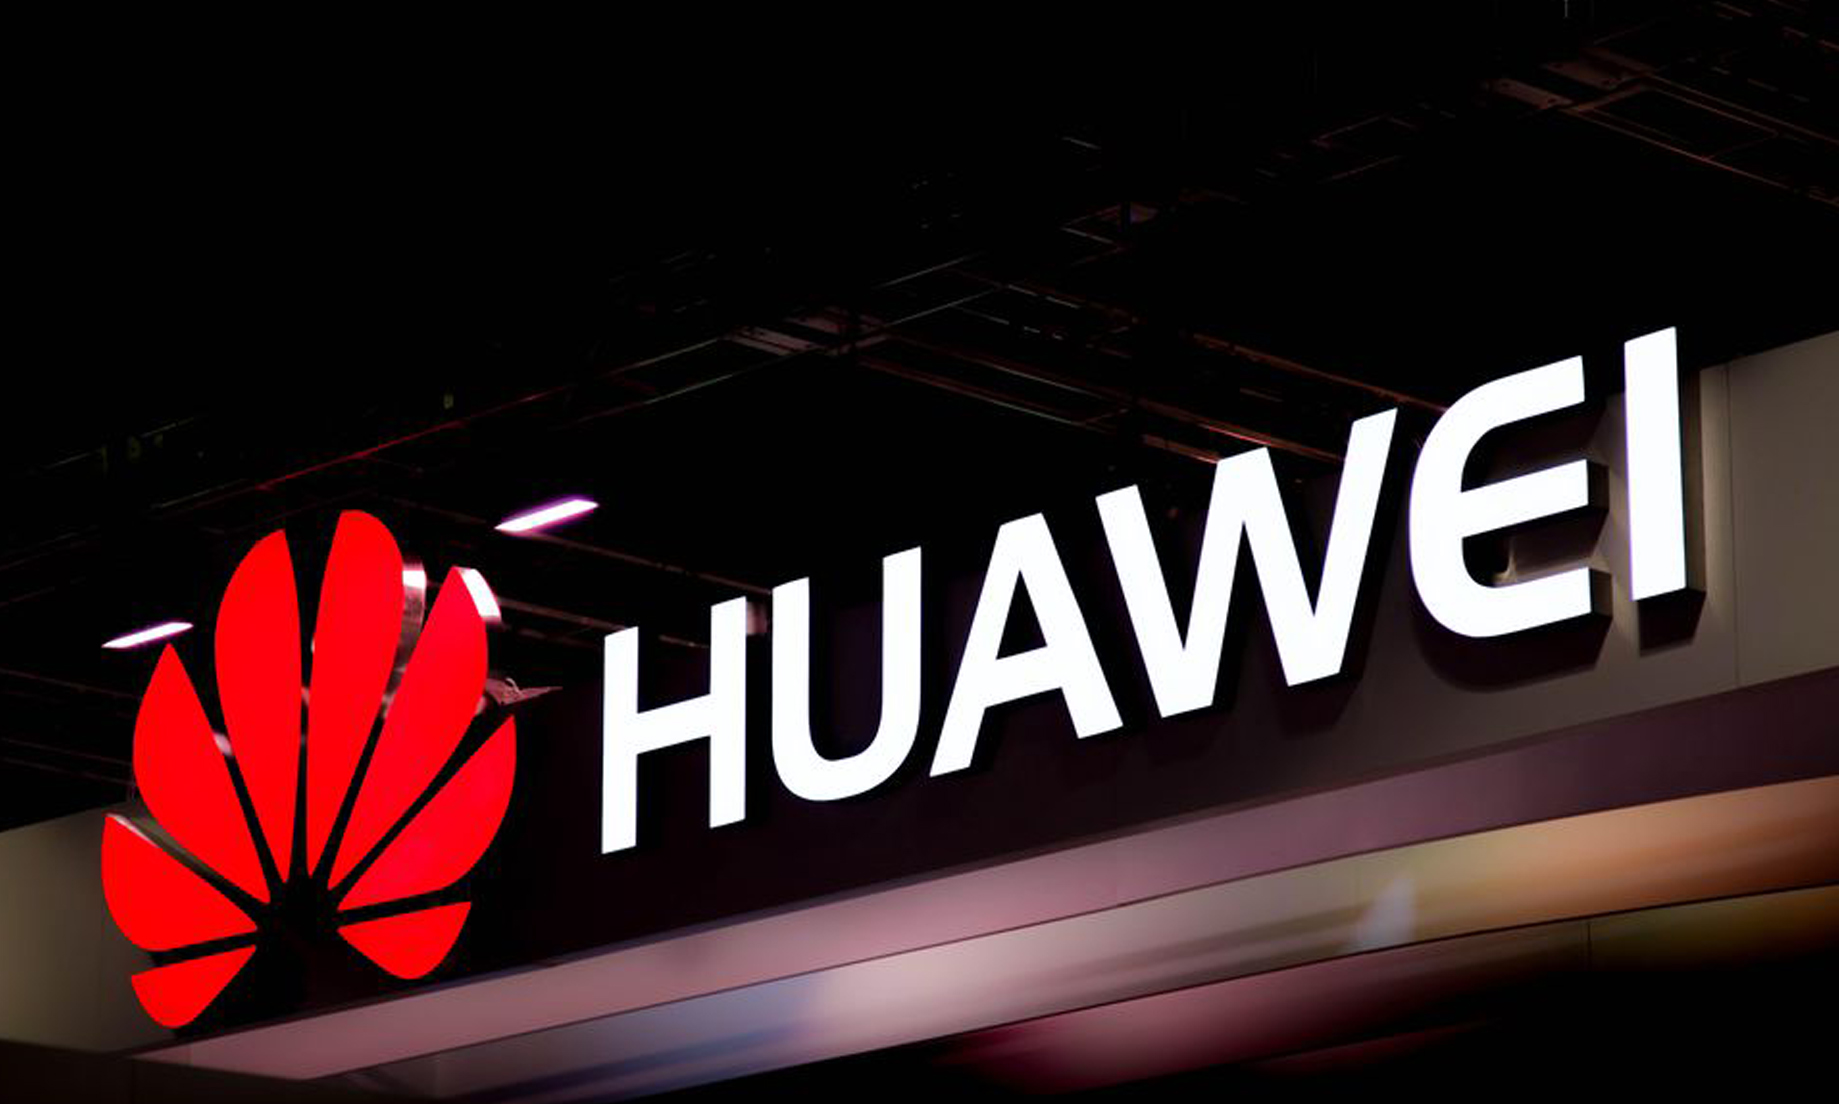 Vice president Mourao says no restrictions on Huawei in Brazil